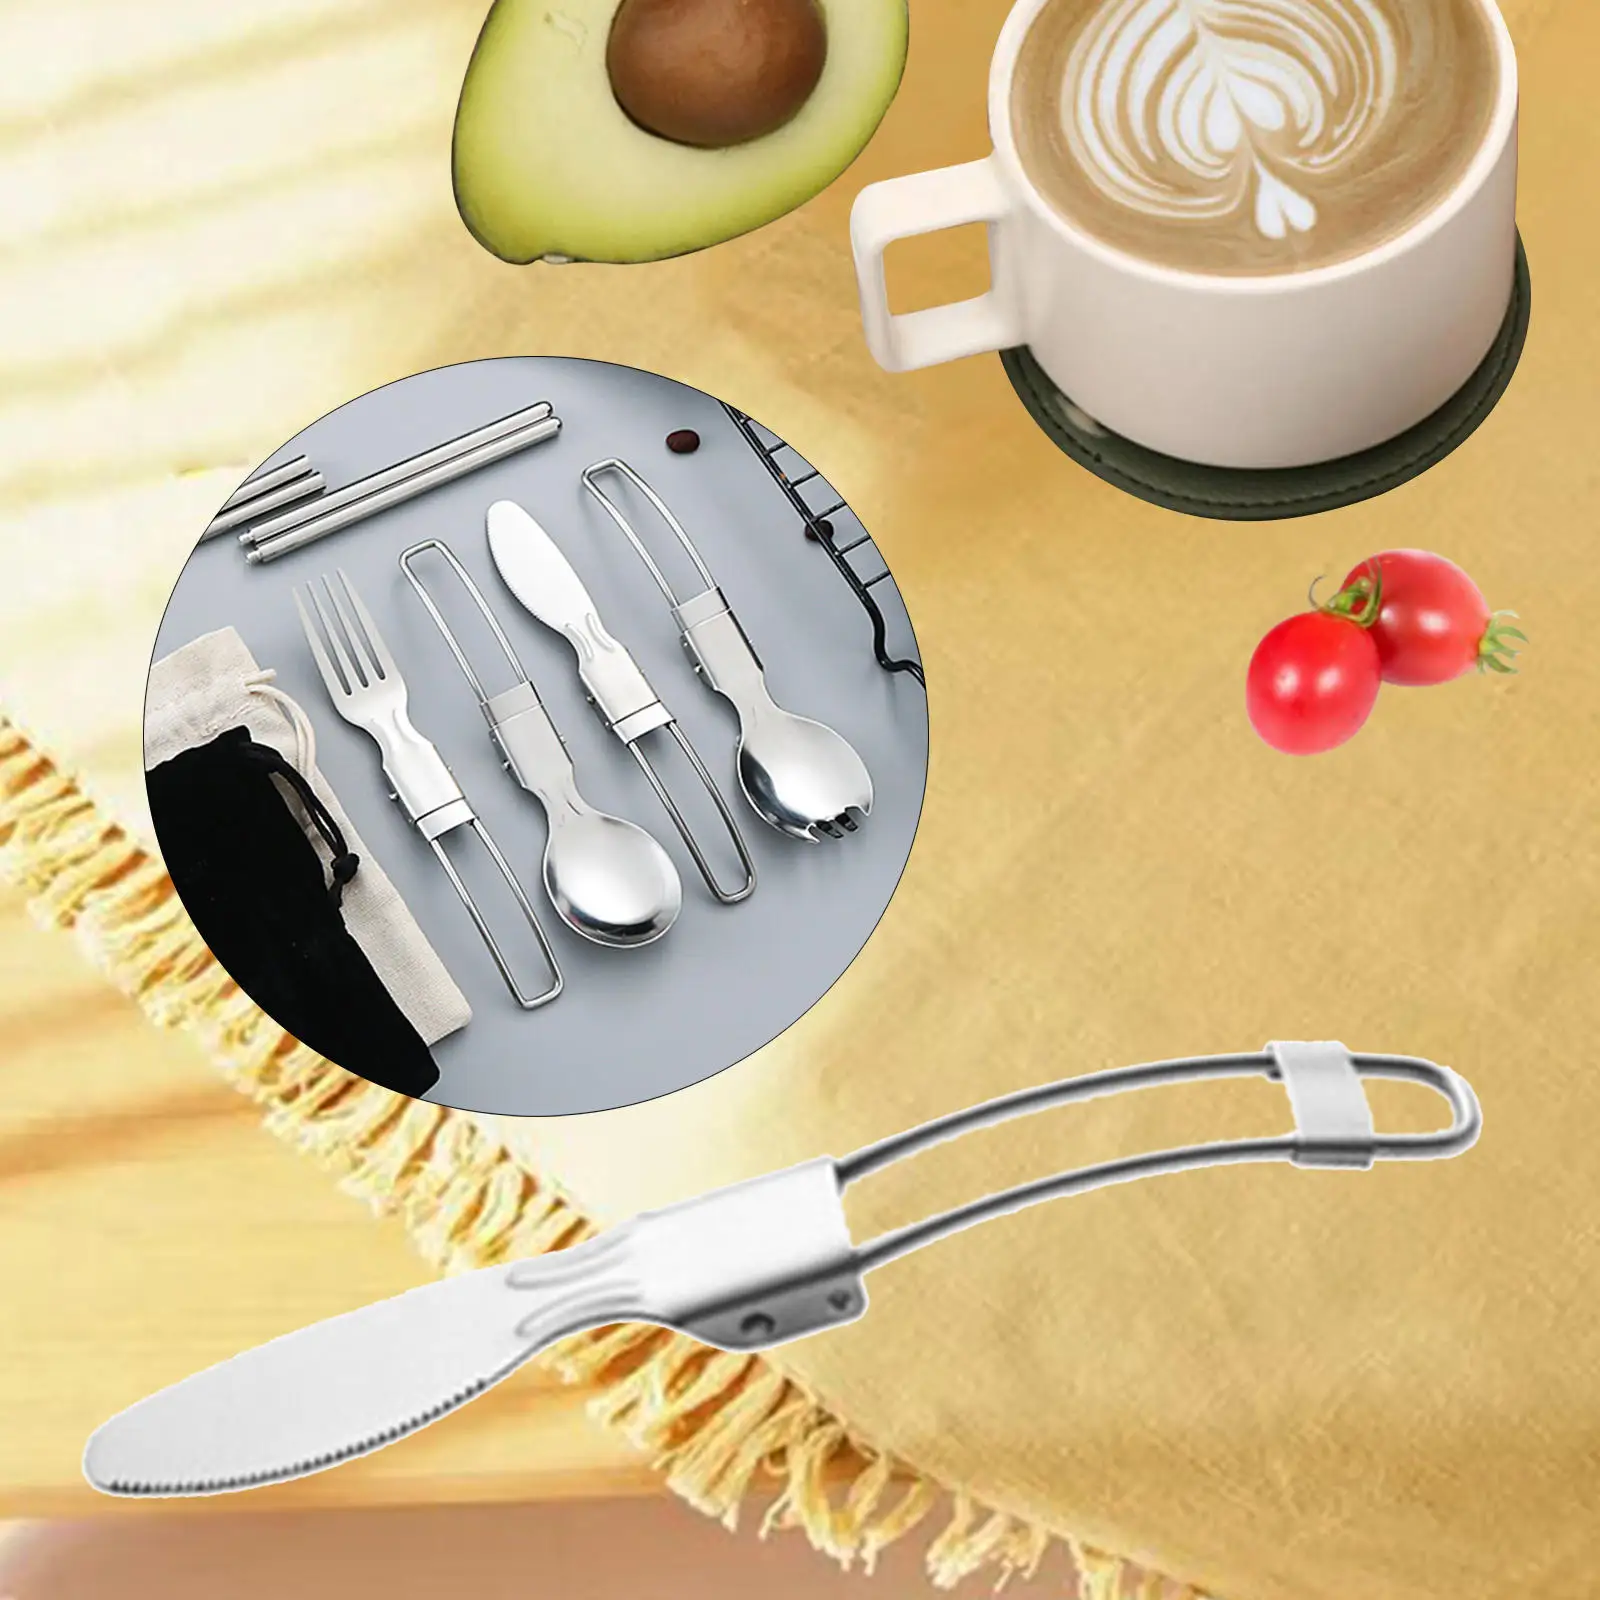 Stainless Steel Folding Cutlery Compact Portable Light Dinnerware with Folding Handle for Camping Travel Office Home Use School